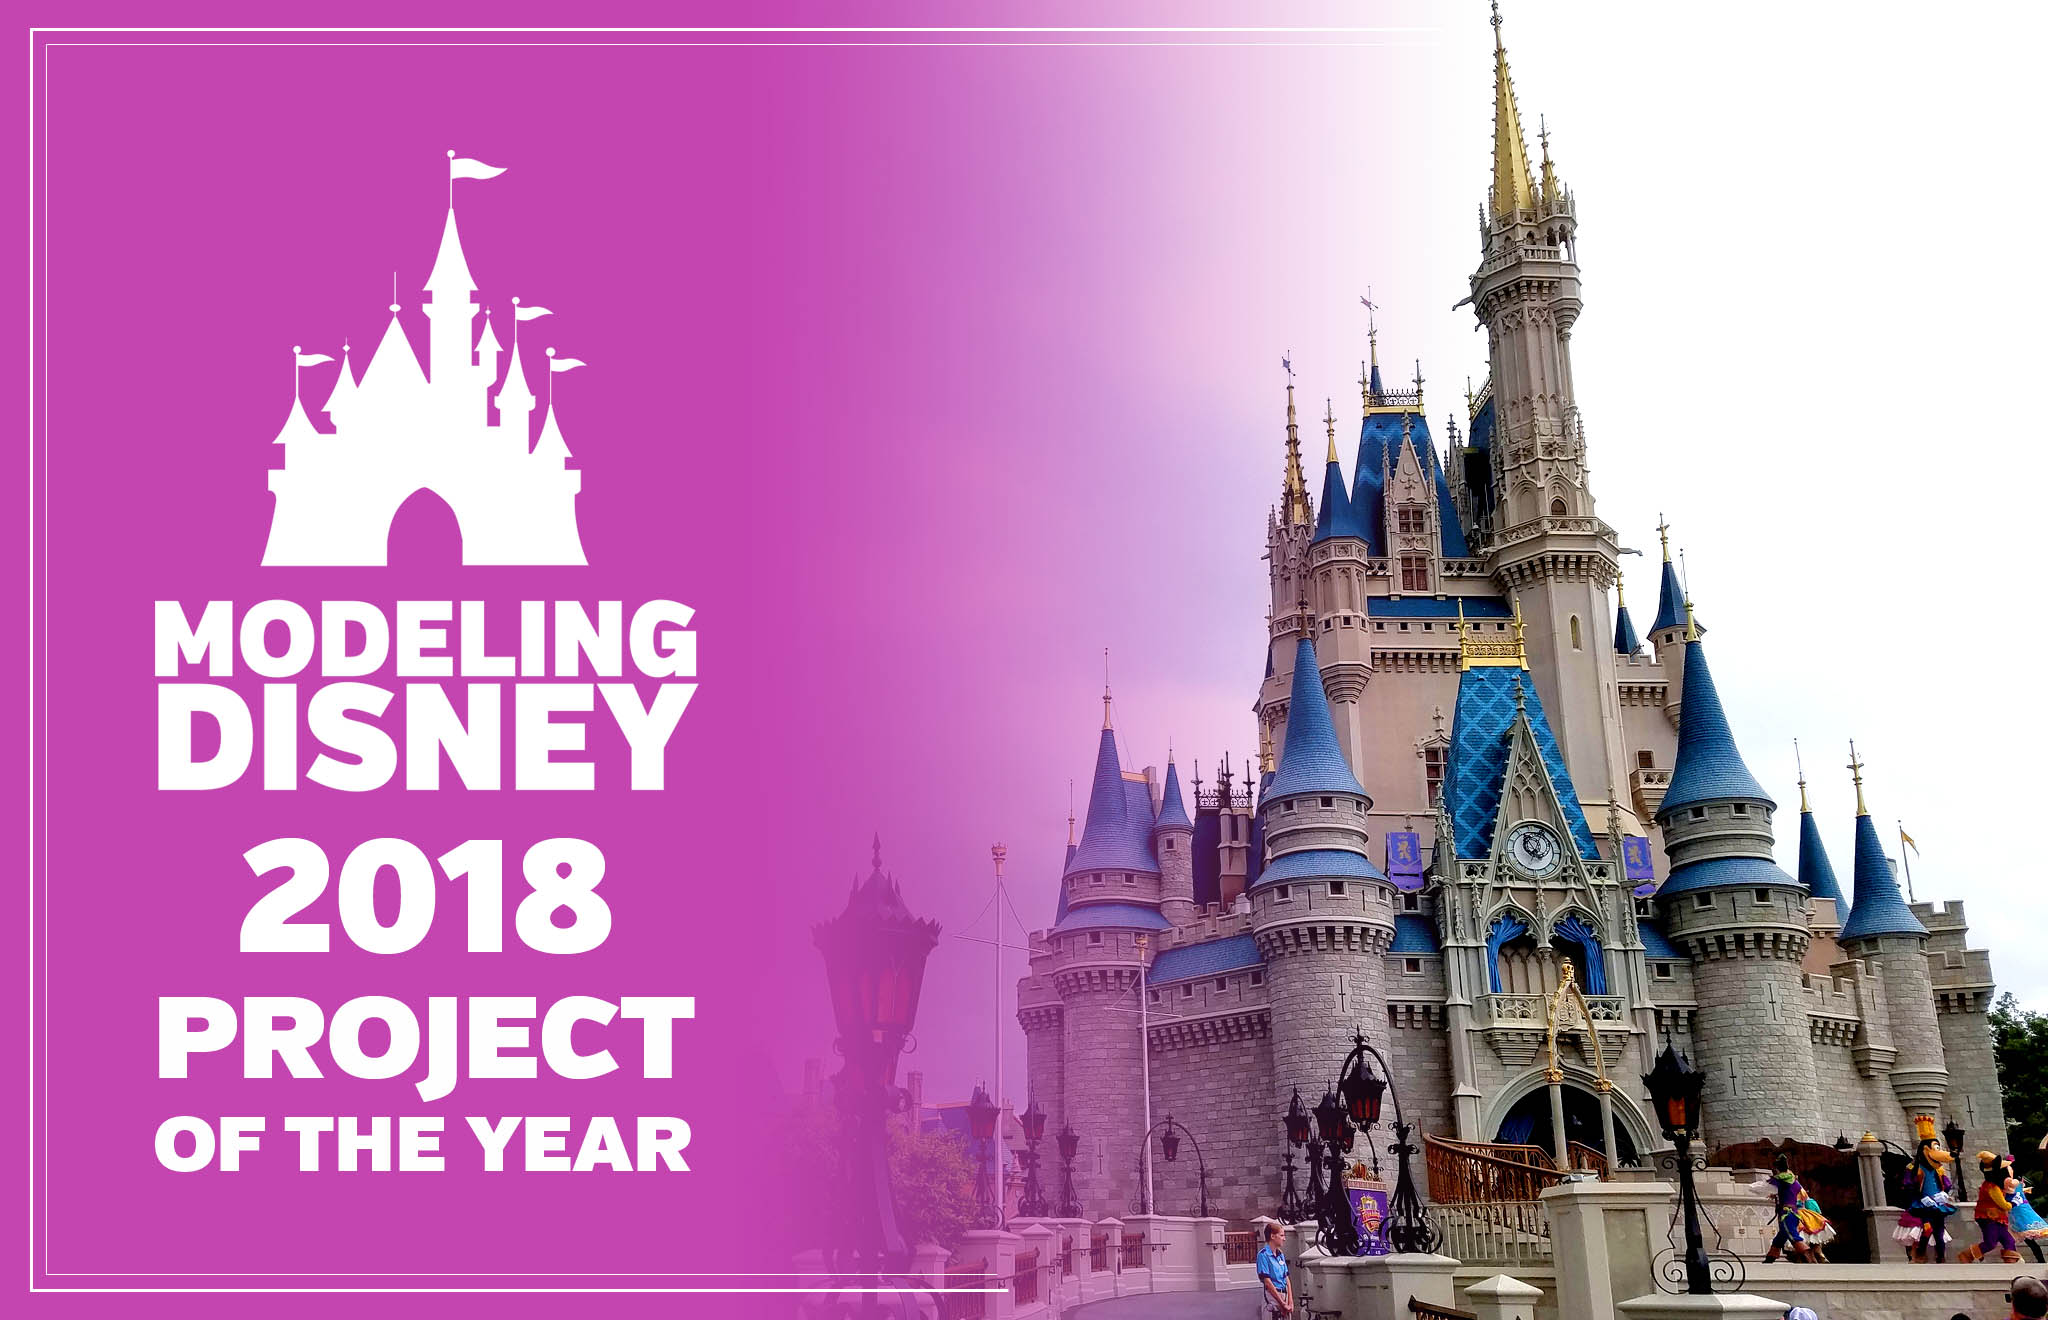 2018 Project of the Year - Modeling Disney - Cinderella Castle in 3D